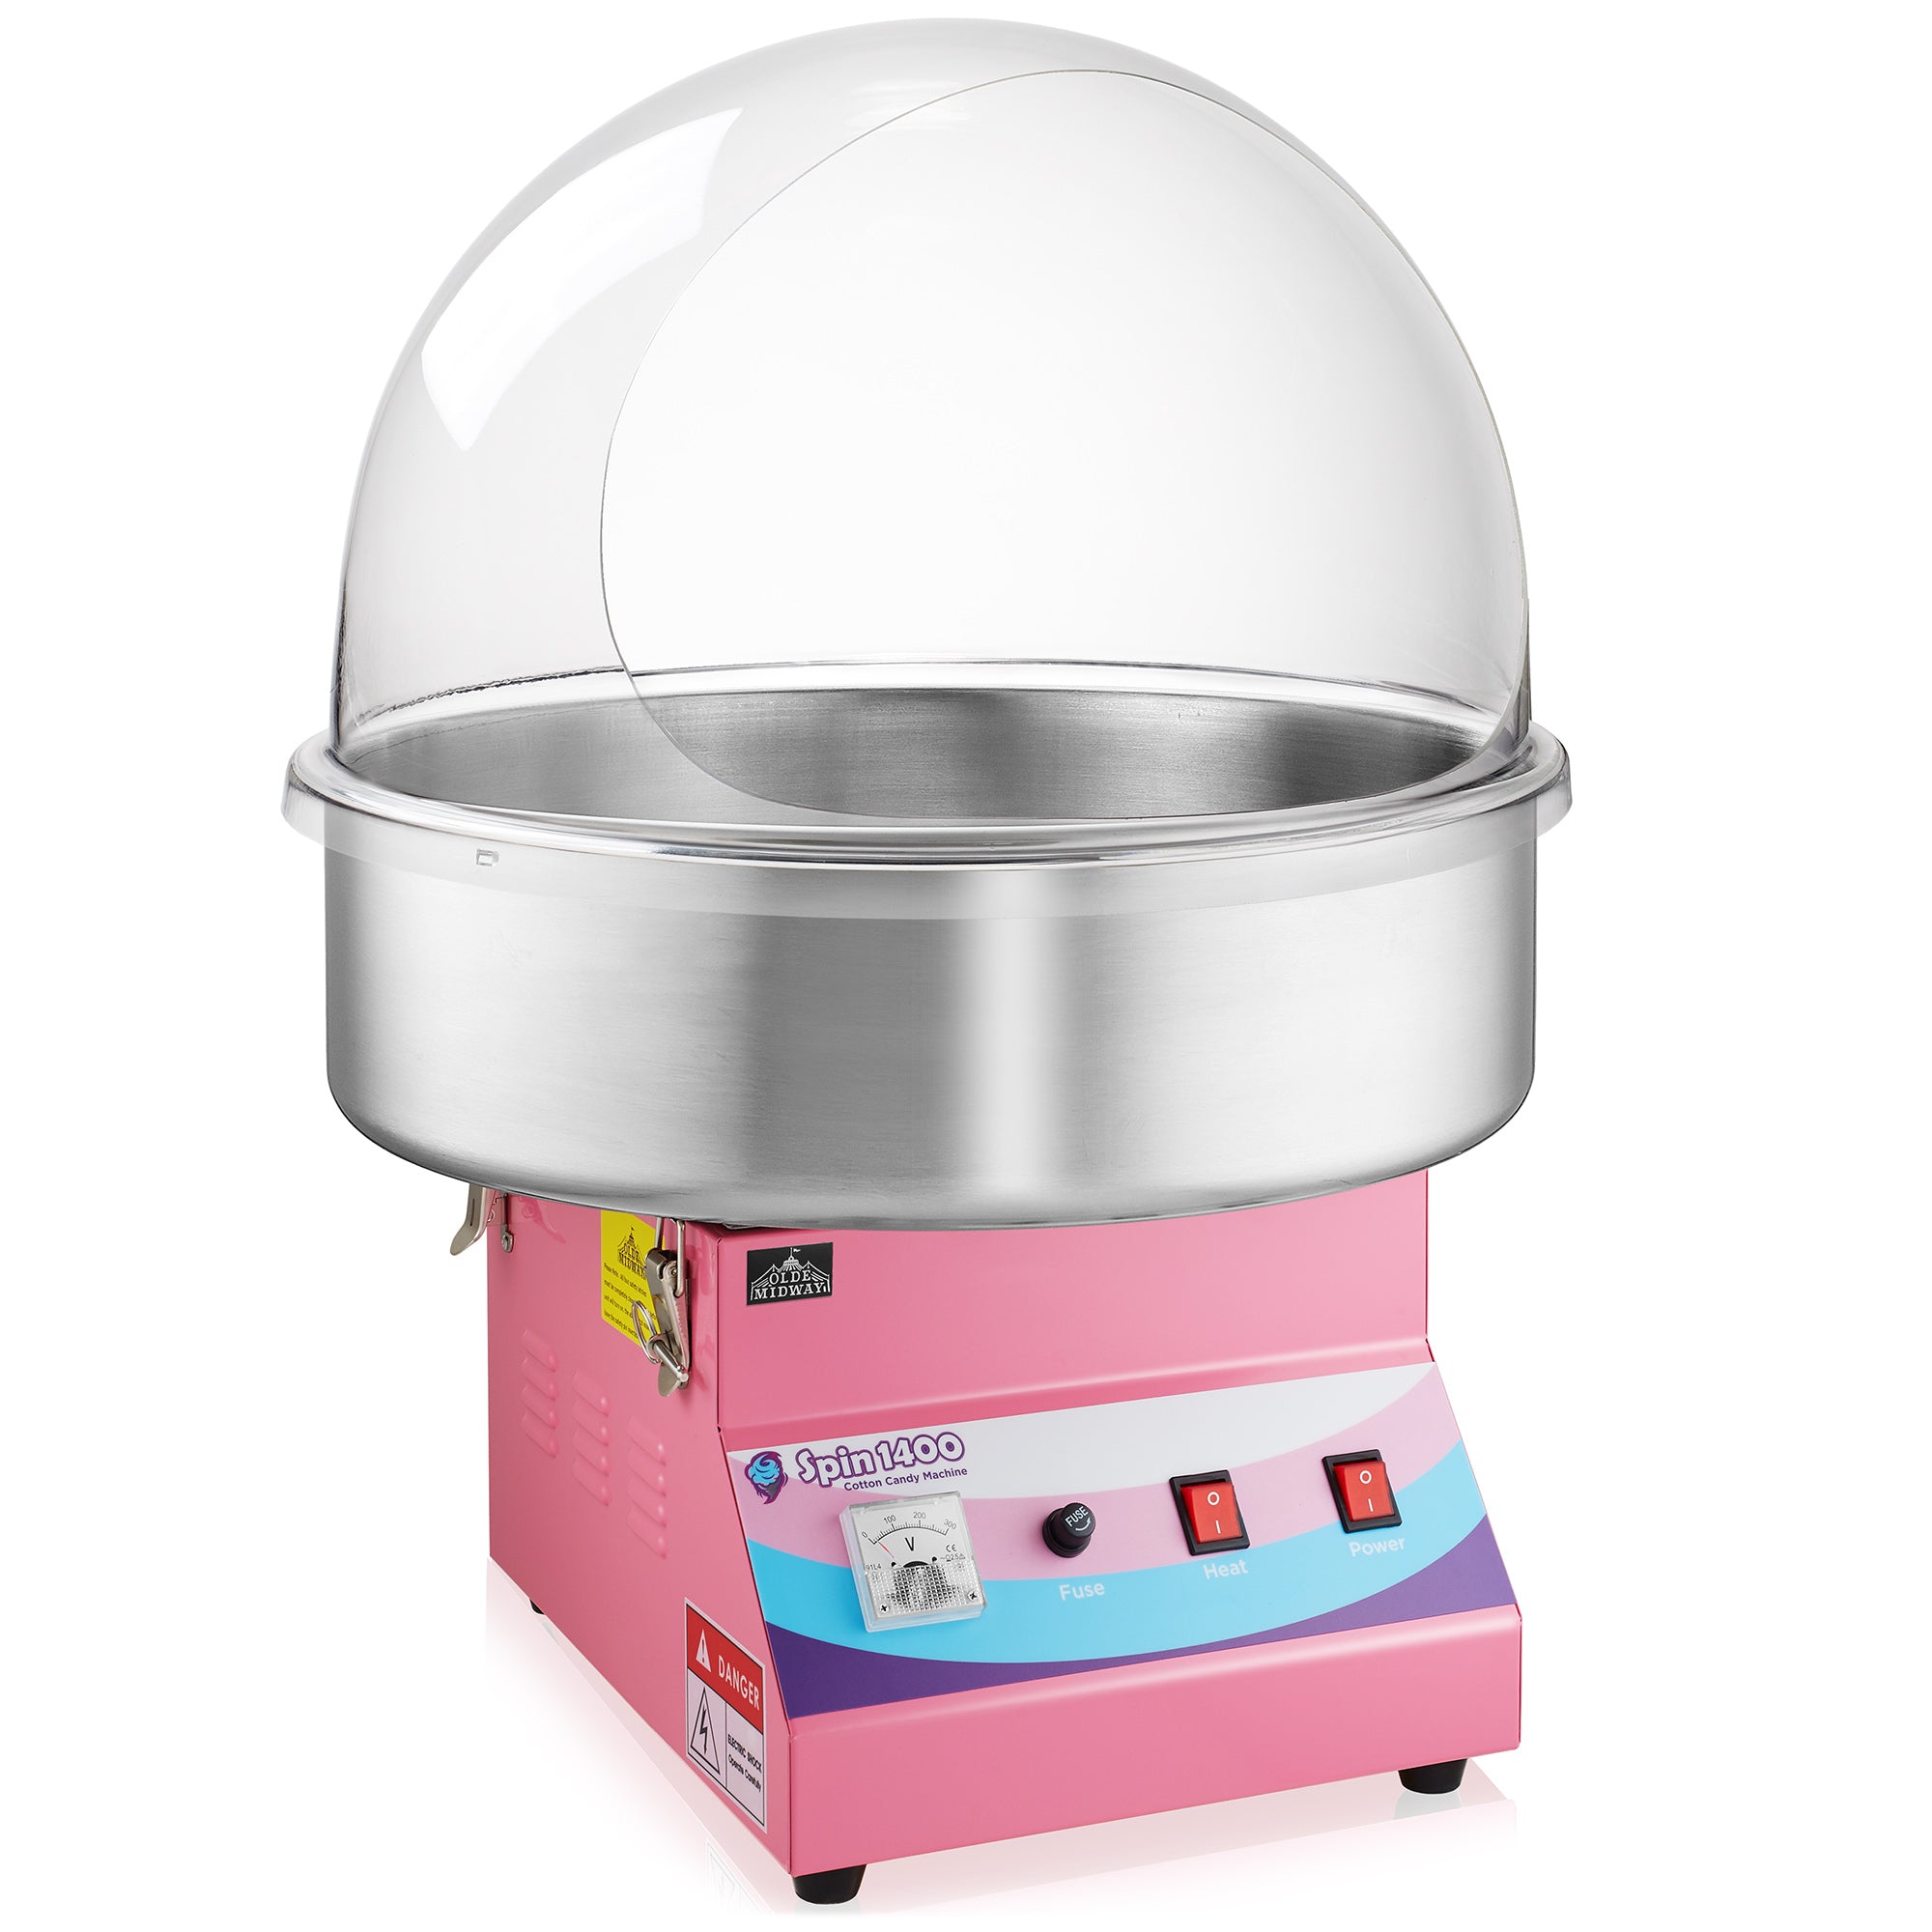 SPIN 1400 Cotton Candy Machine with Dome Cover - Olde Midway